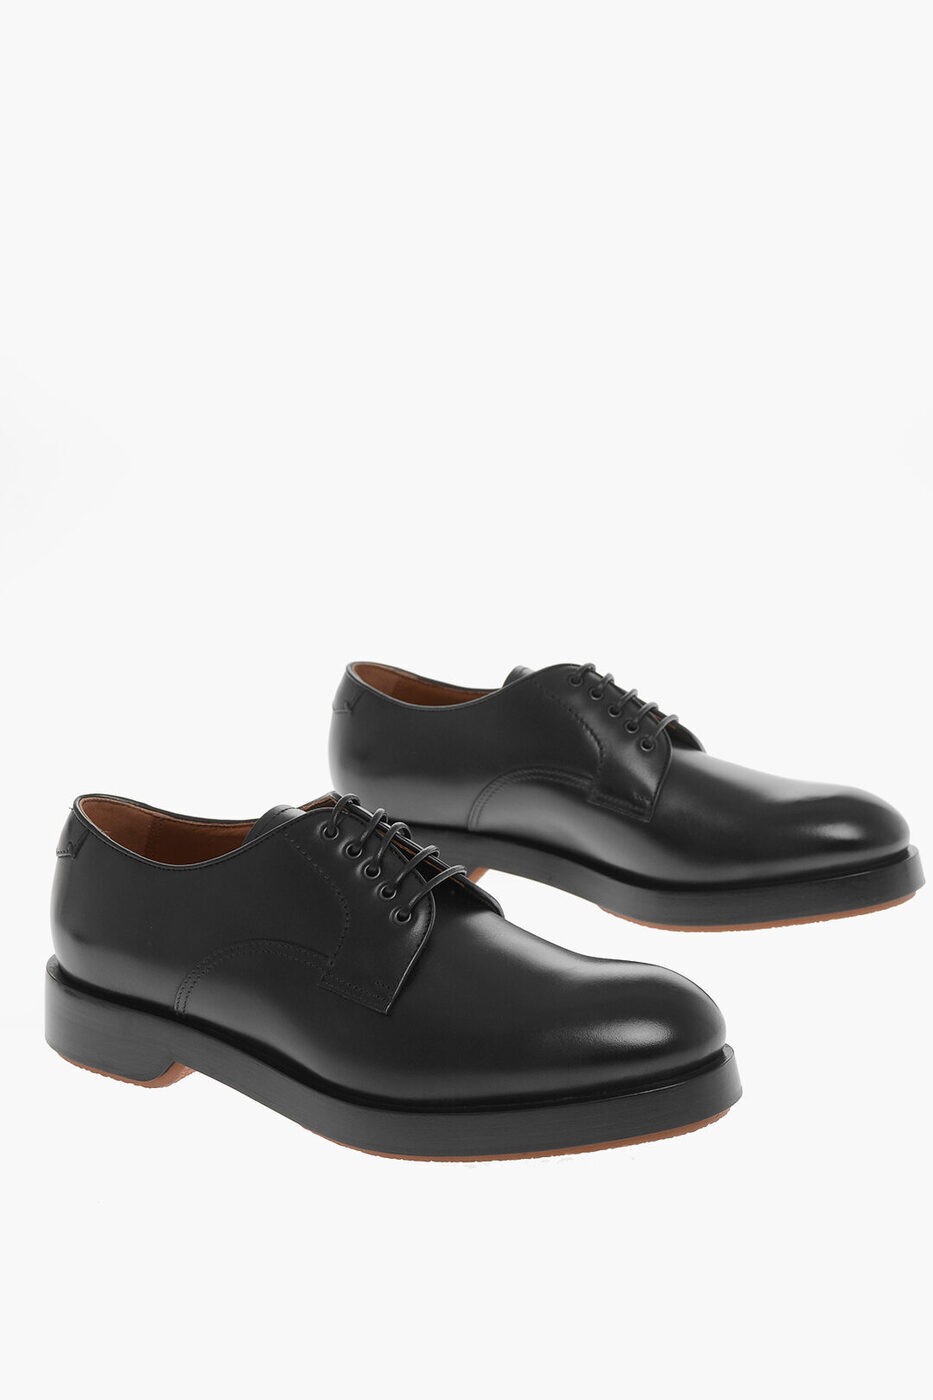 ZEGNA ゼニア ドレスシューズ A4562Z LHHRS NER メンズ PLATFORM SOLE UDINE LEATHER DERBY SHOES 【関税 送料無料】【ラッピング無料】 dk